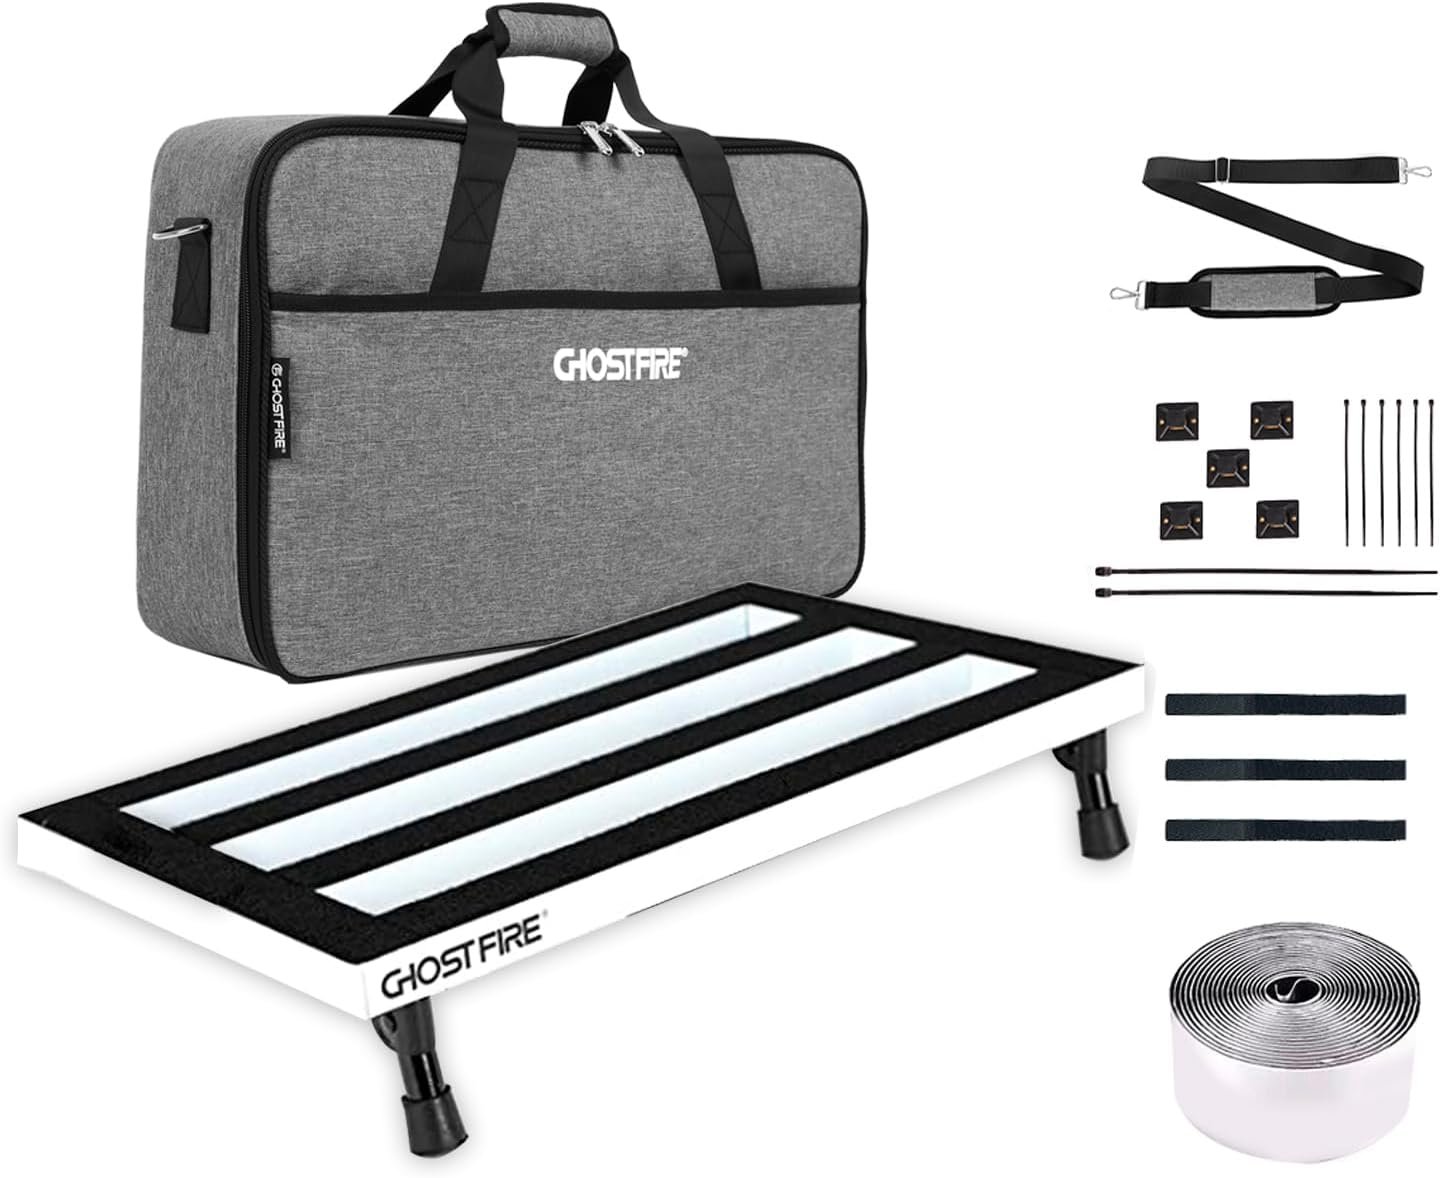 Ghost Fire Guitar Pedal Board Aluminum Alloy 1.76lb Super light Effect Pedalboard 19.8x11.5 with Carry Bag,SPL-04